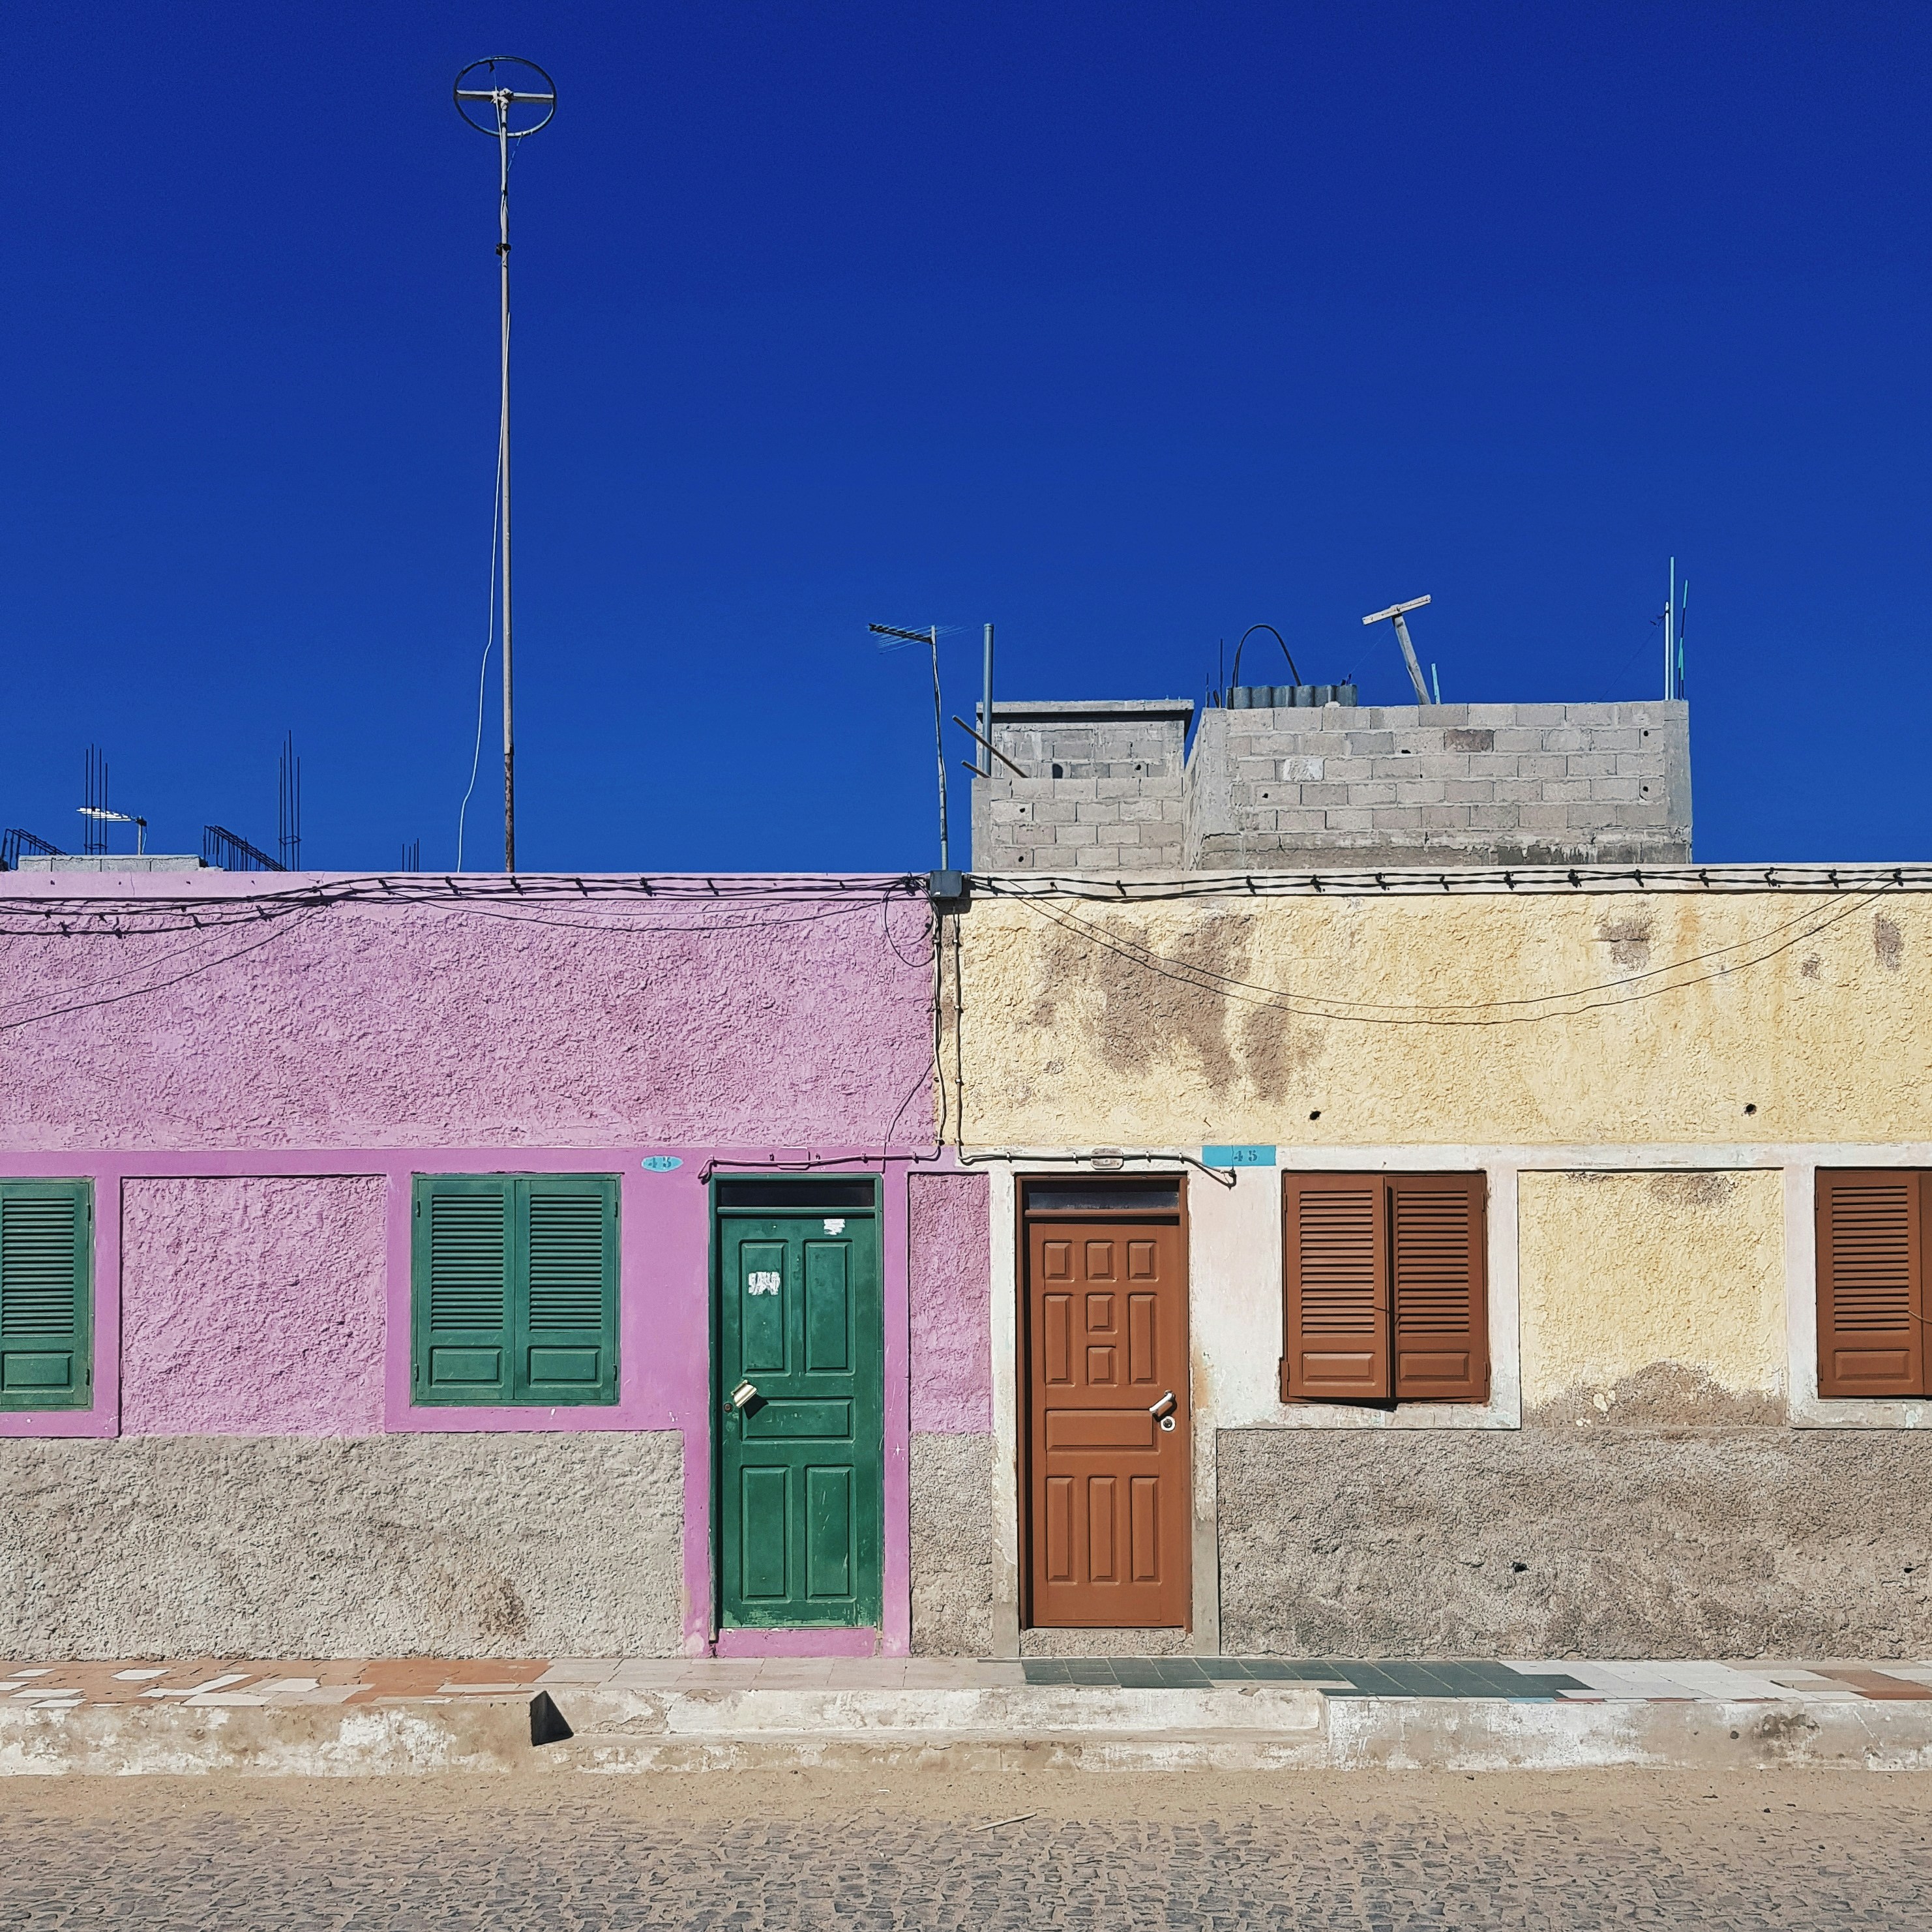 Colorful houses in downtown Santa Maria on Sale, Cape Verde.